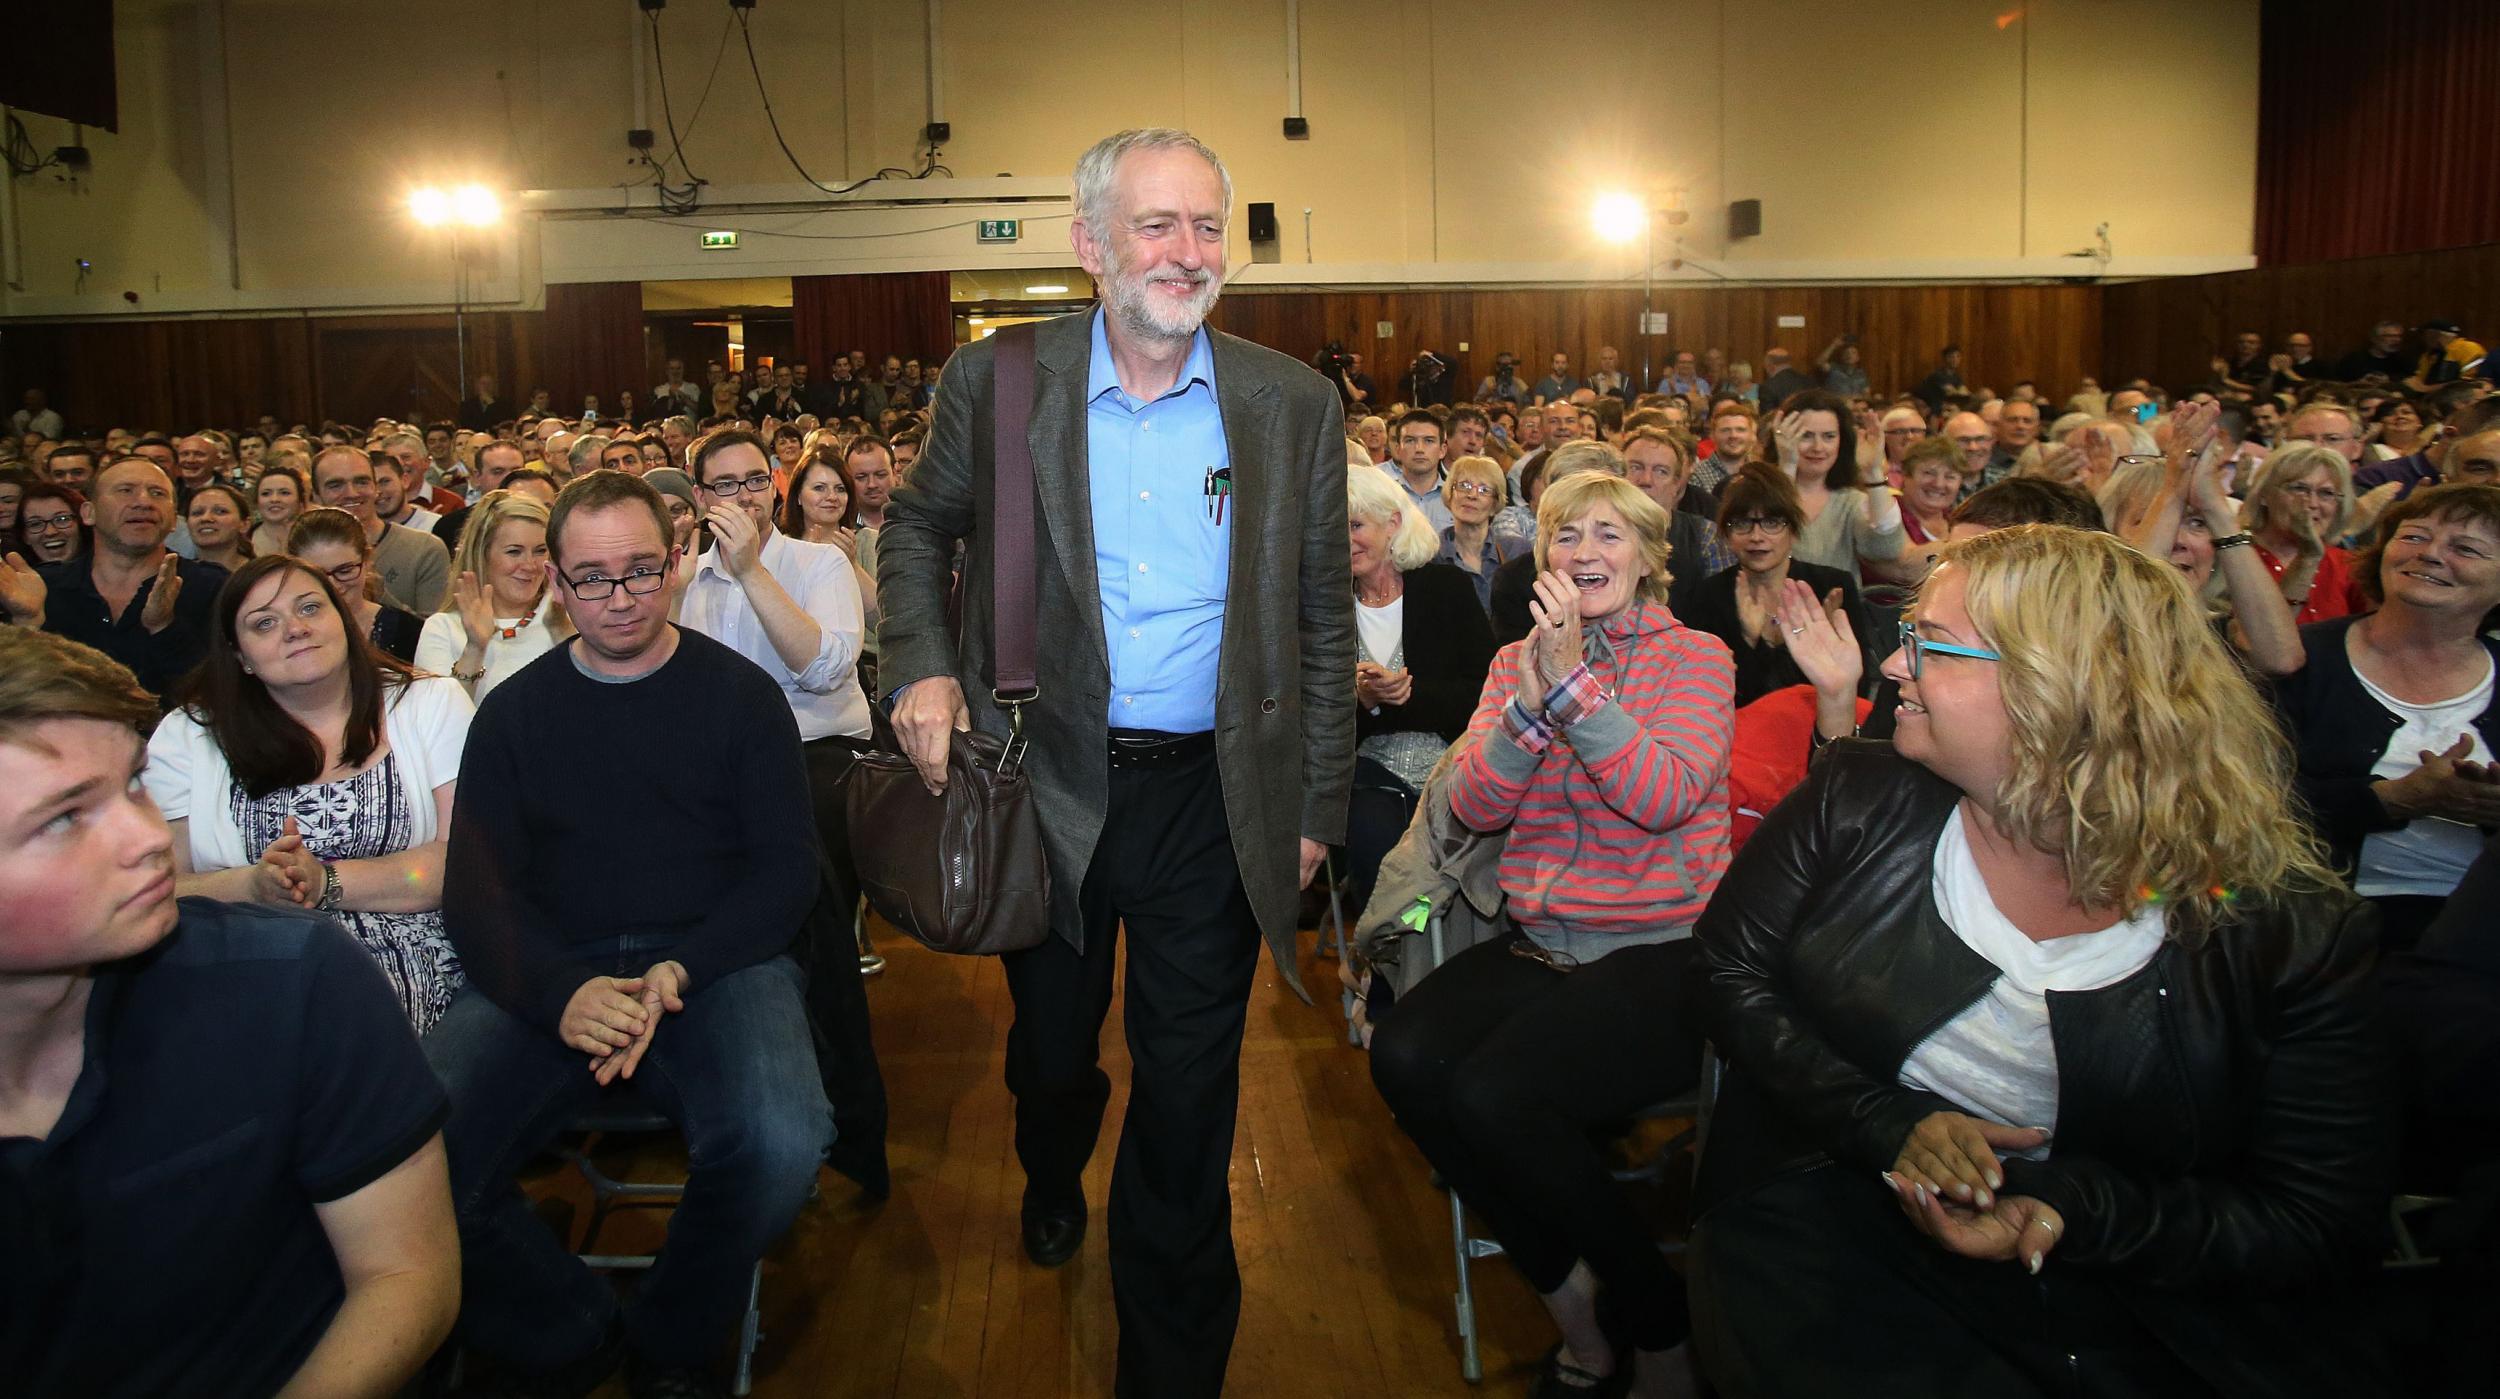 Jeremy Corbyn drew large crowds for speeches during the Labour leadership election